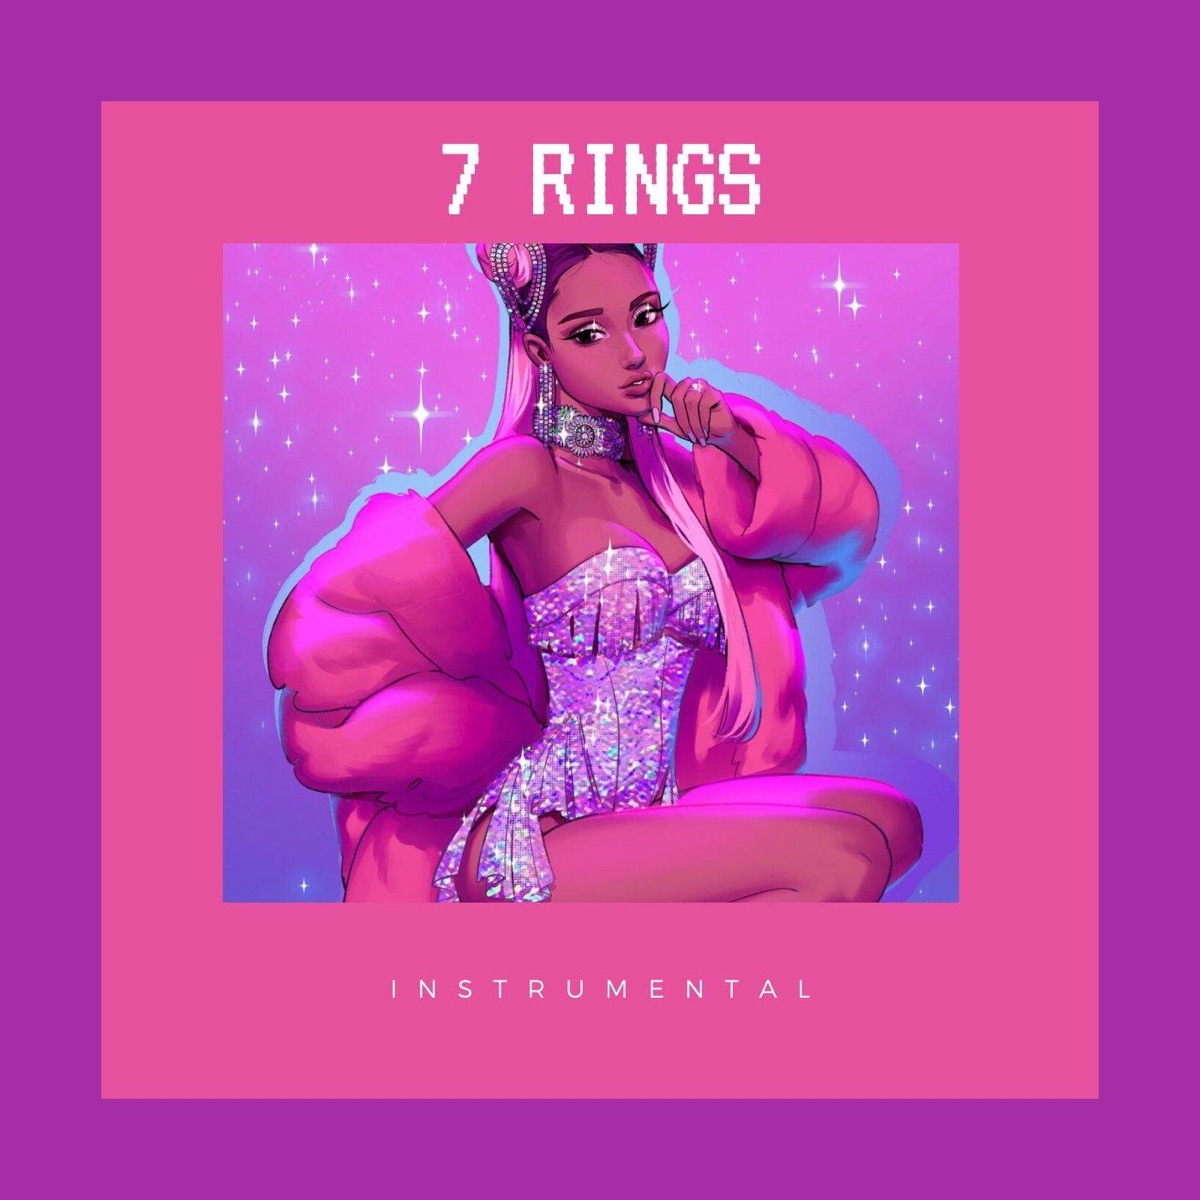 Play 7 Rings (Instrumental Remix) by i-genius on Amazon Music